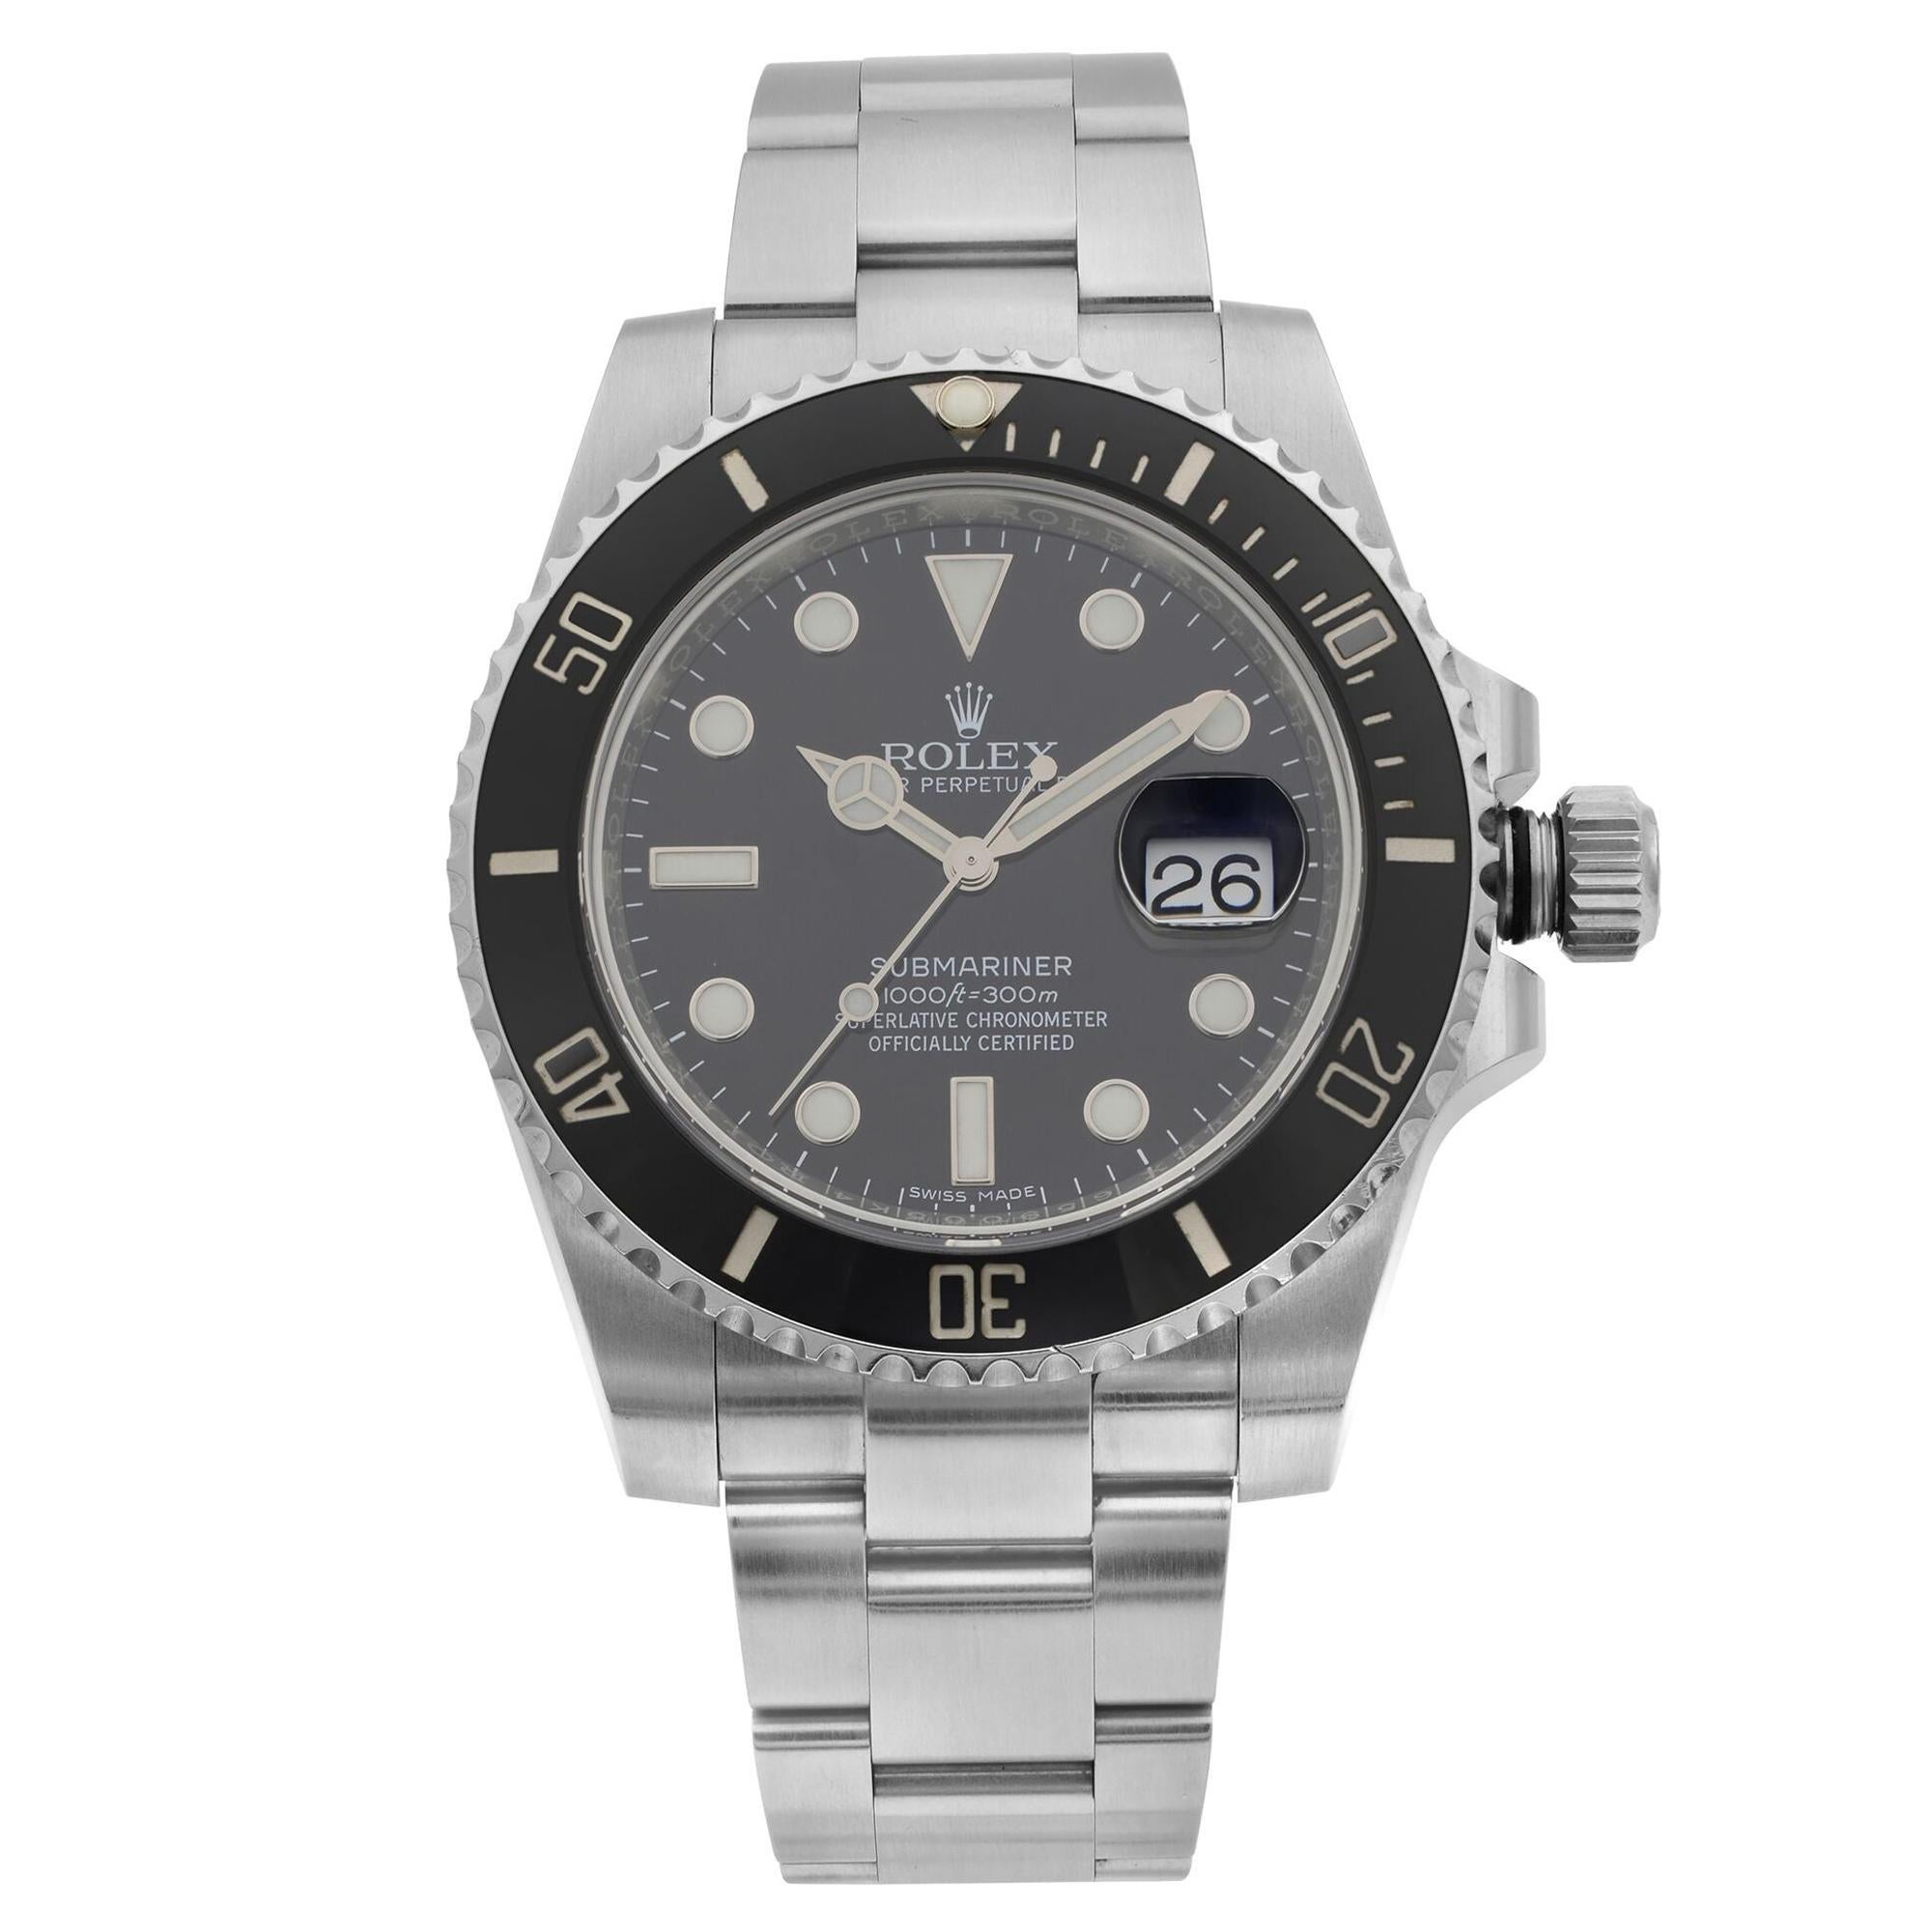 Rolex Submariner Stainless Steel Black Dial Date Automatic Men’s Watch 116610LN